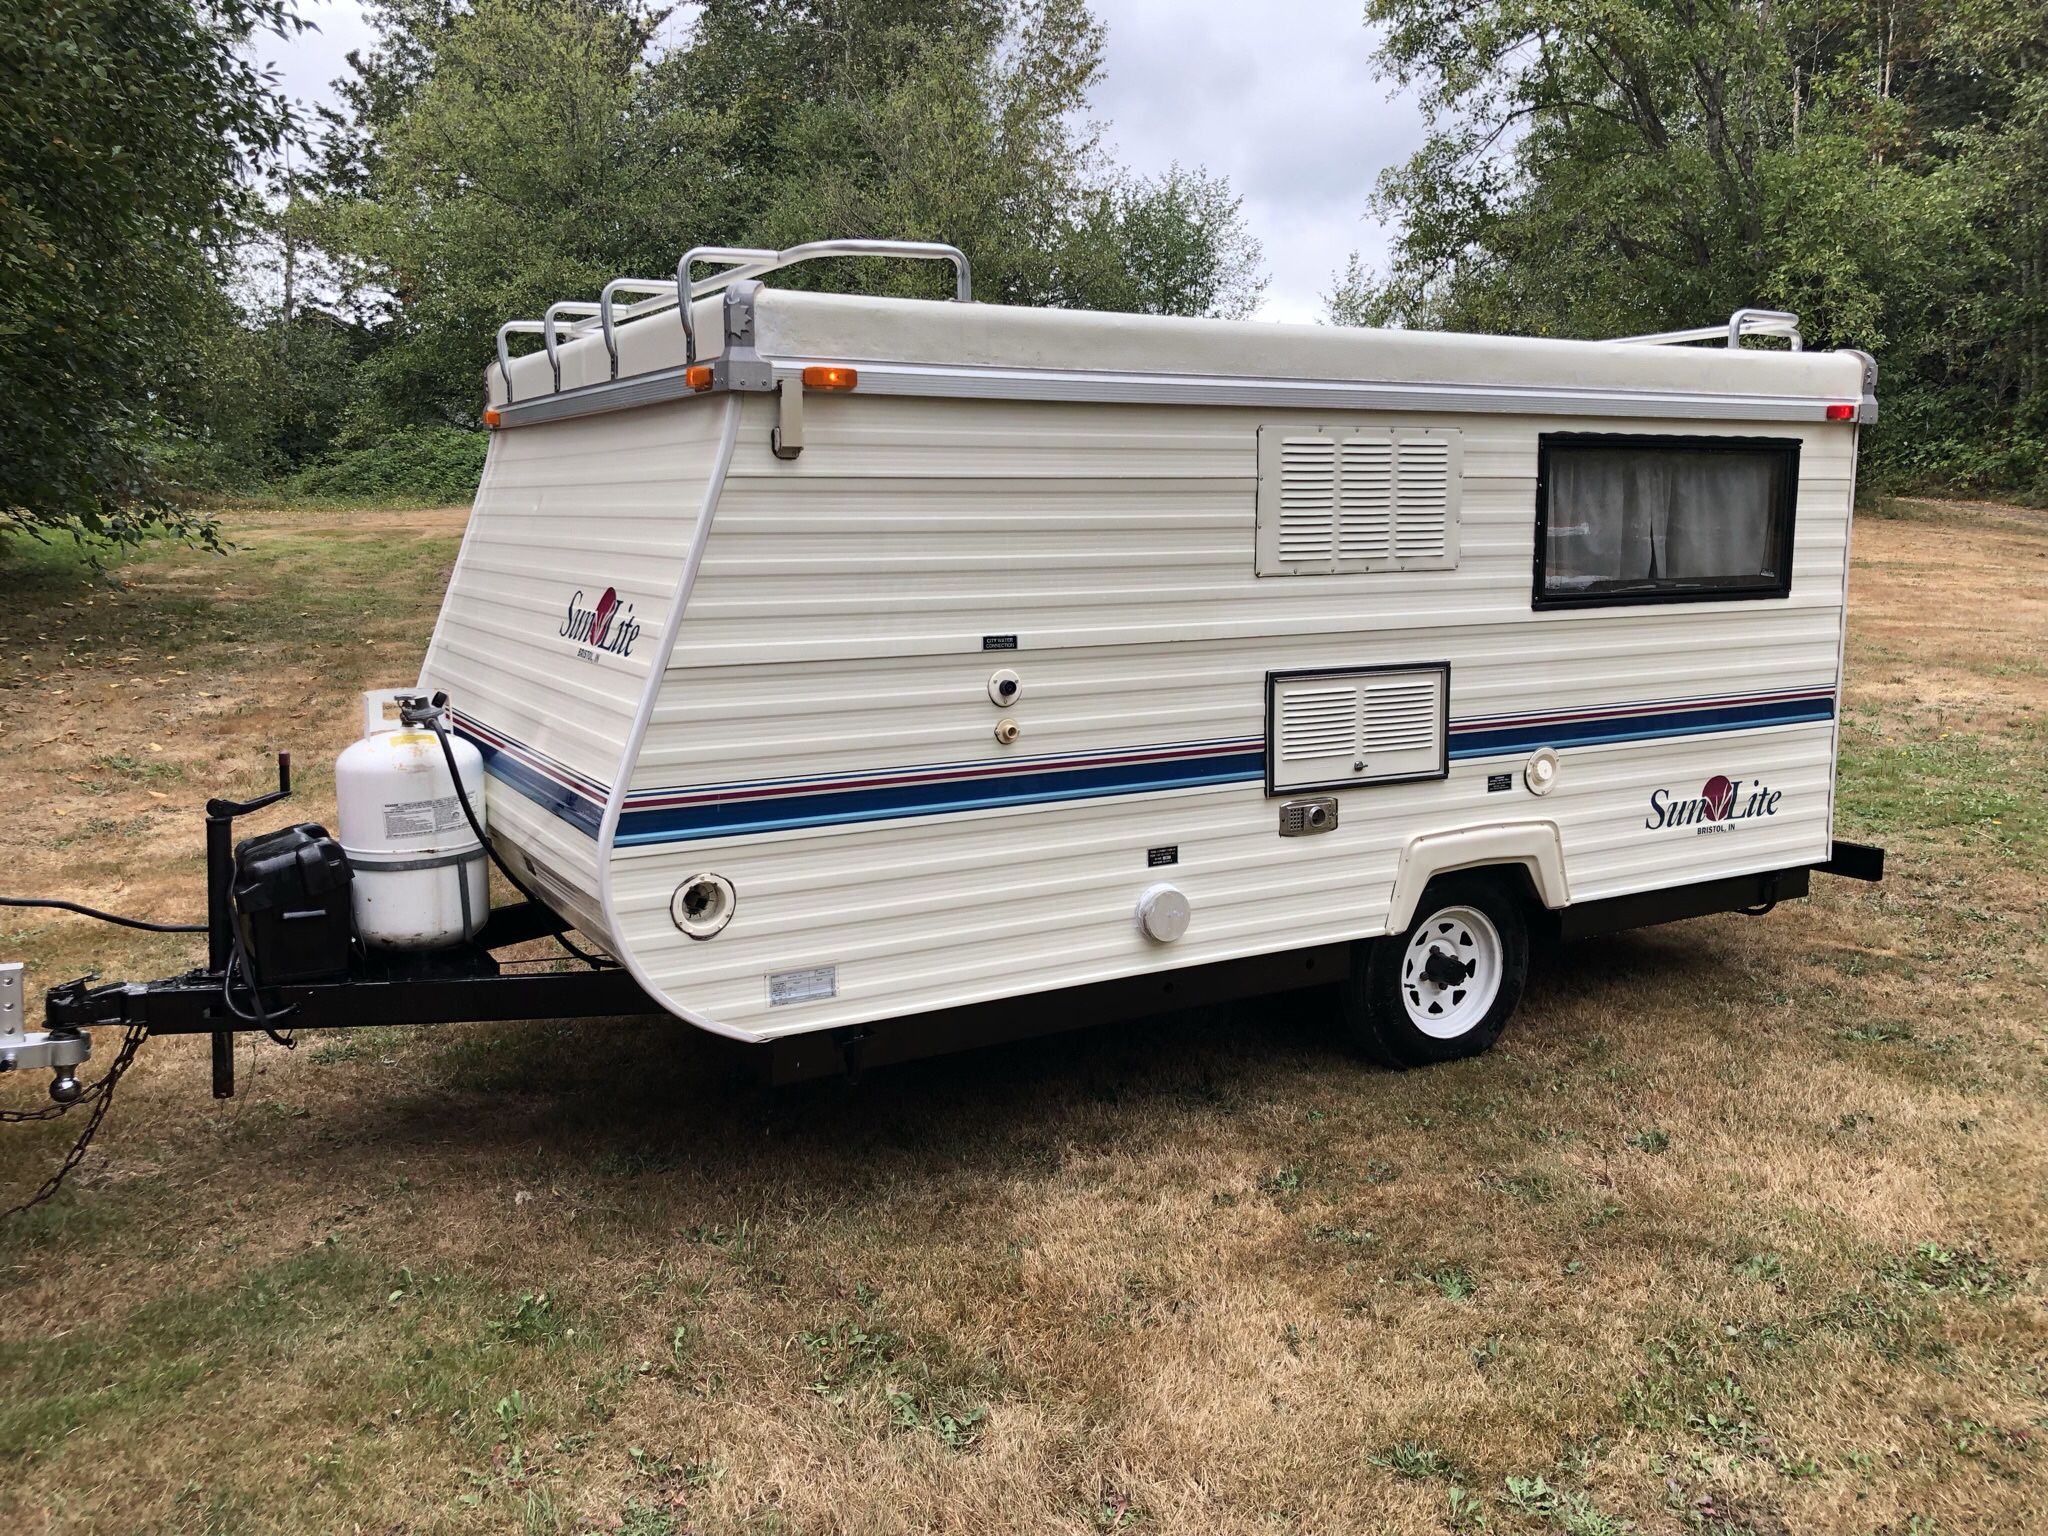 1994 Sunlight Travel Trailer 15ft for Sale in Snohomish, WA - OfferUp